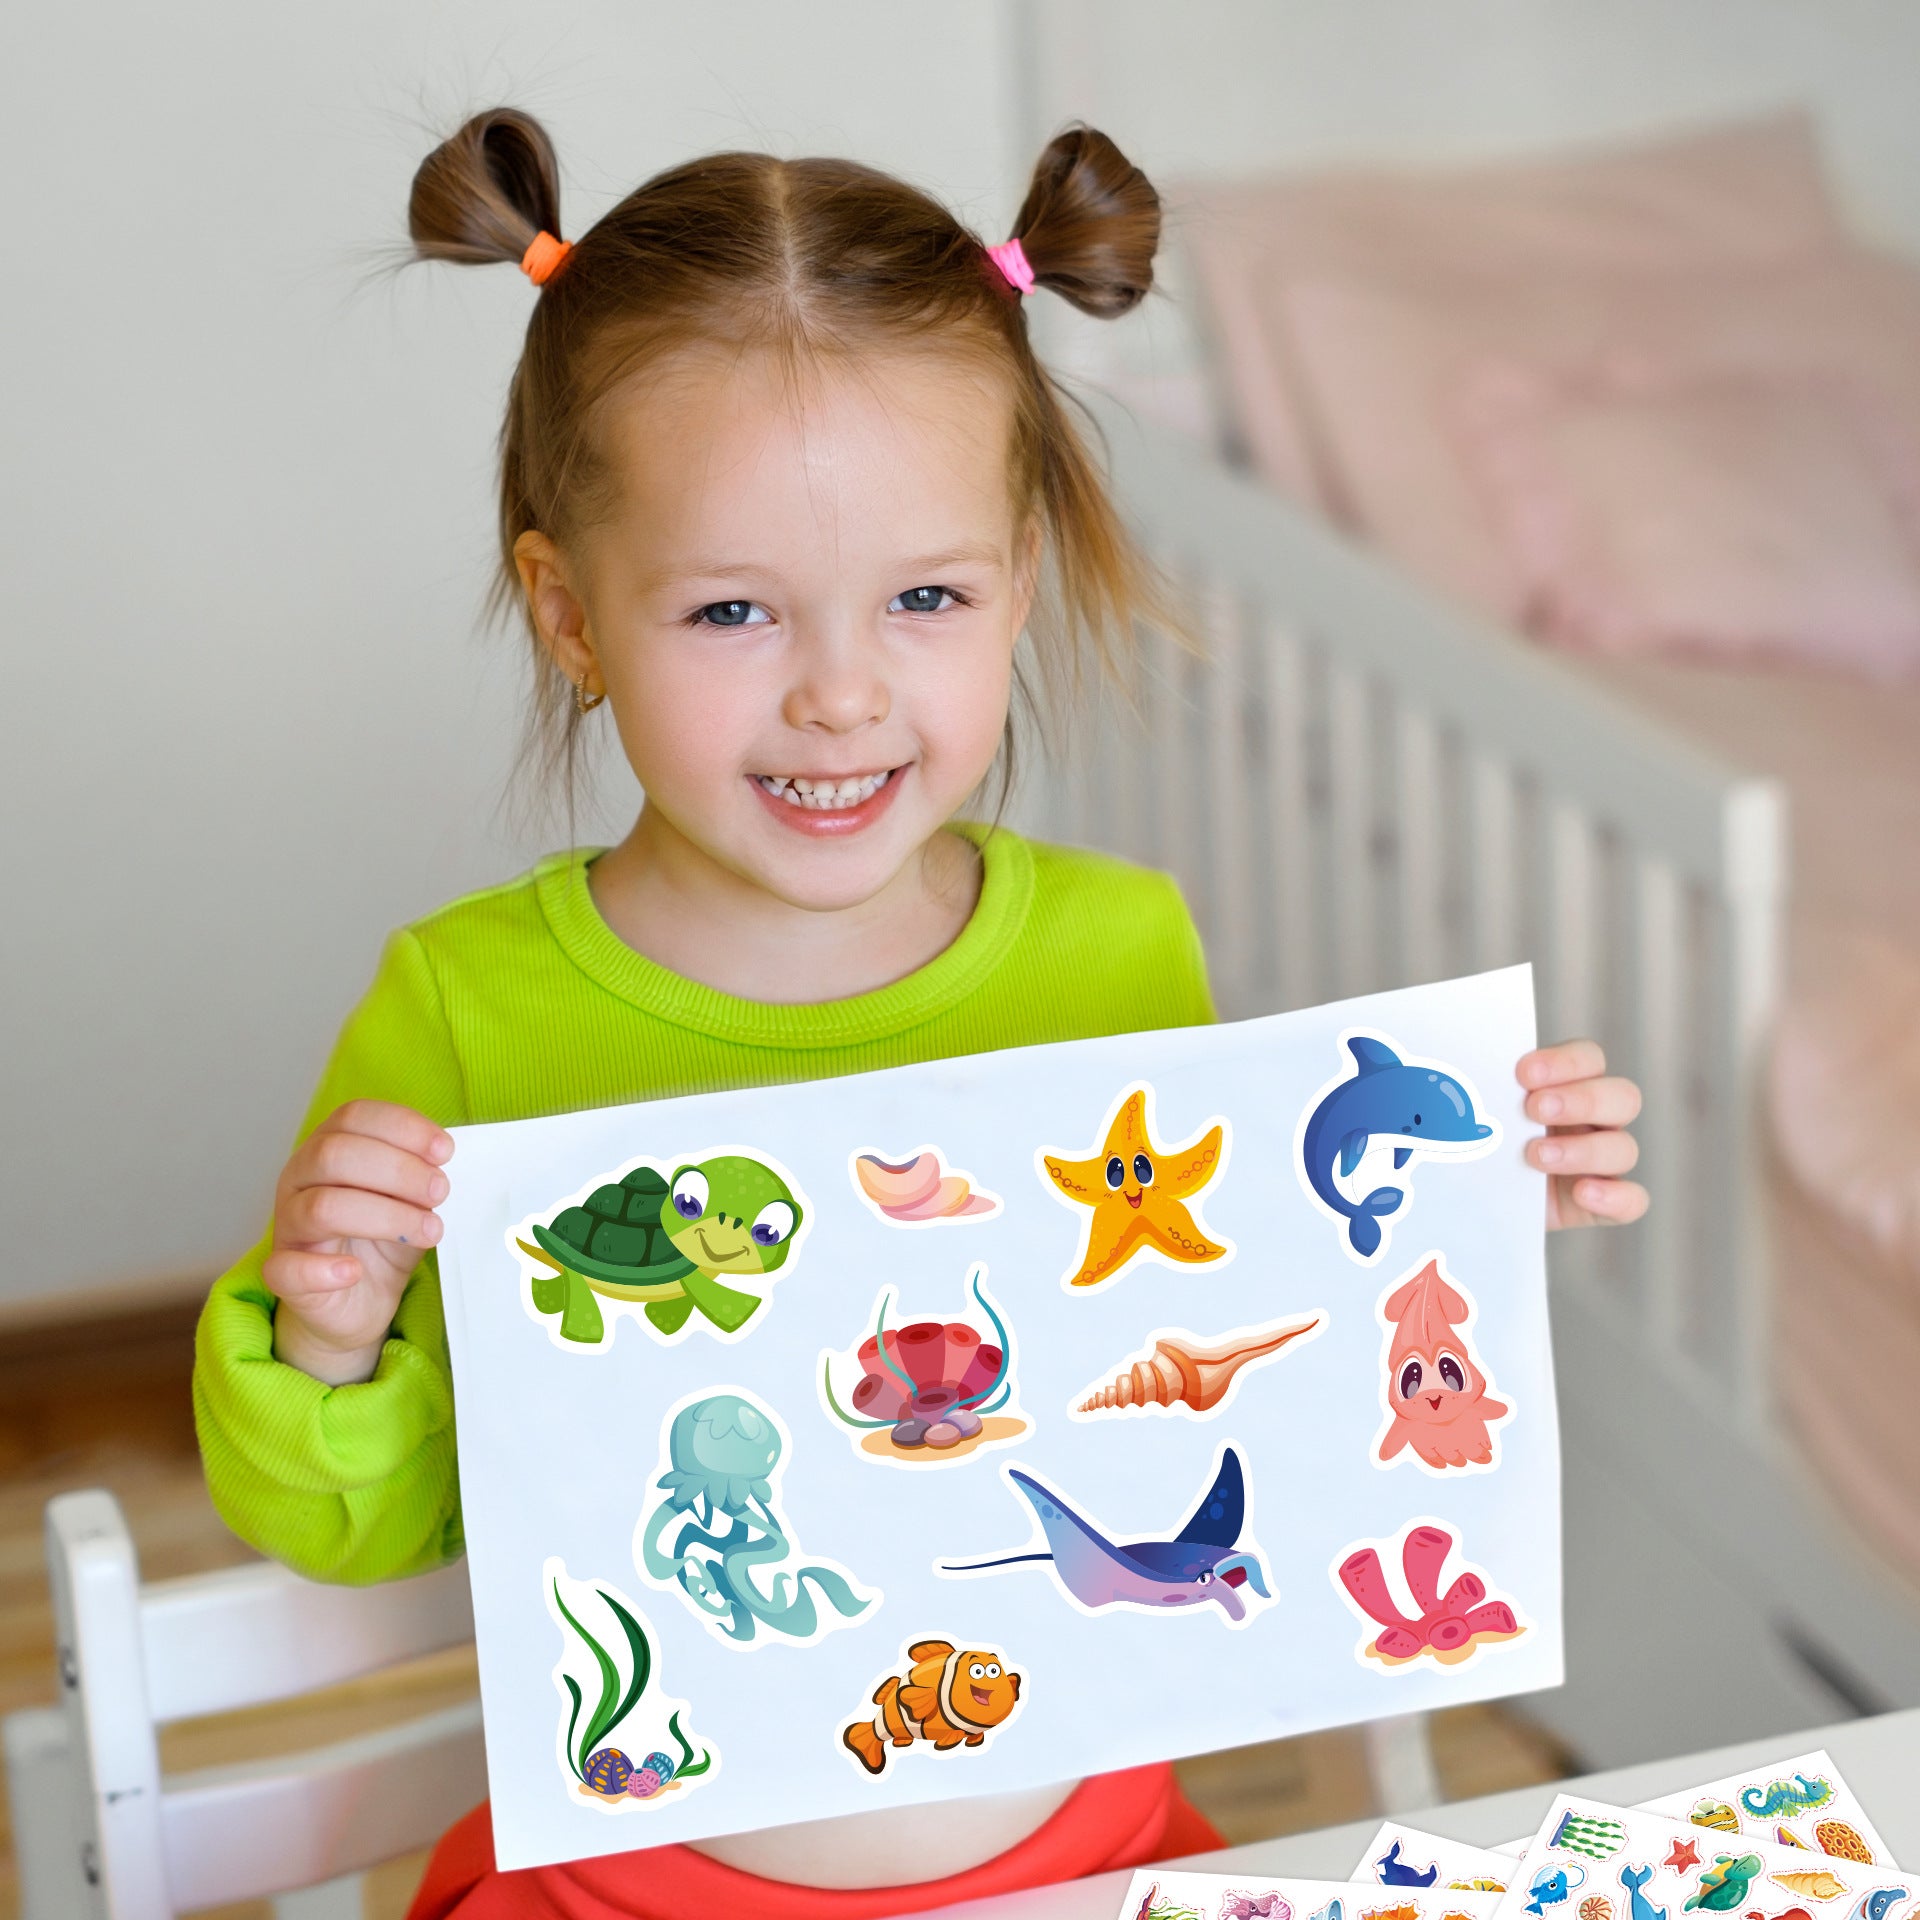 32 Sheets Ocean Sealife Animal Stickers for Kids